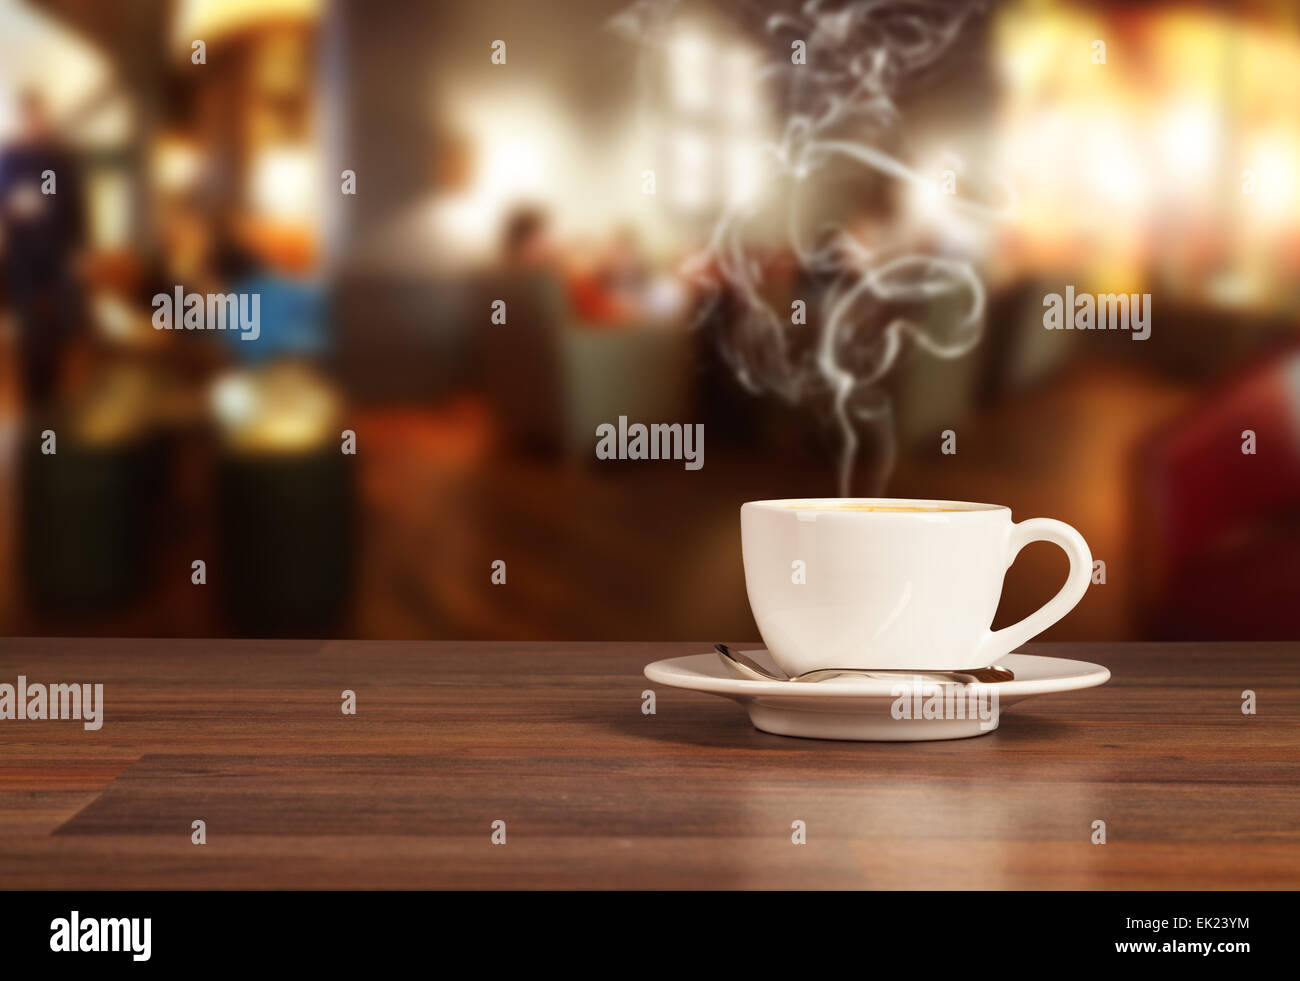 Coffee drink on wooden table with blur cafeteria as background Stock Photo